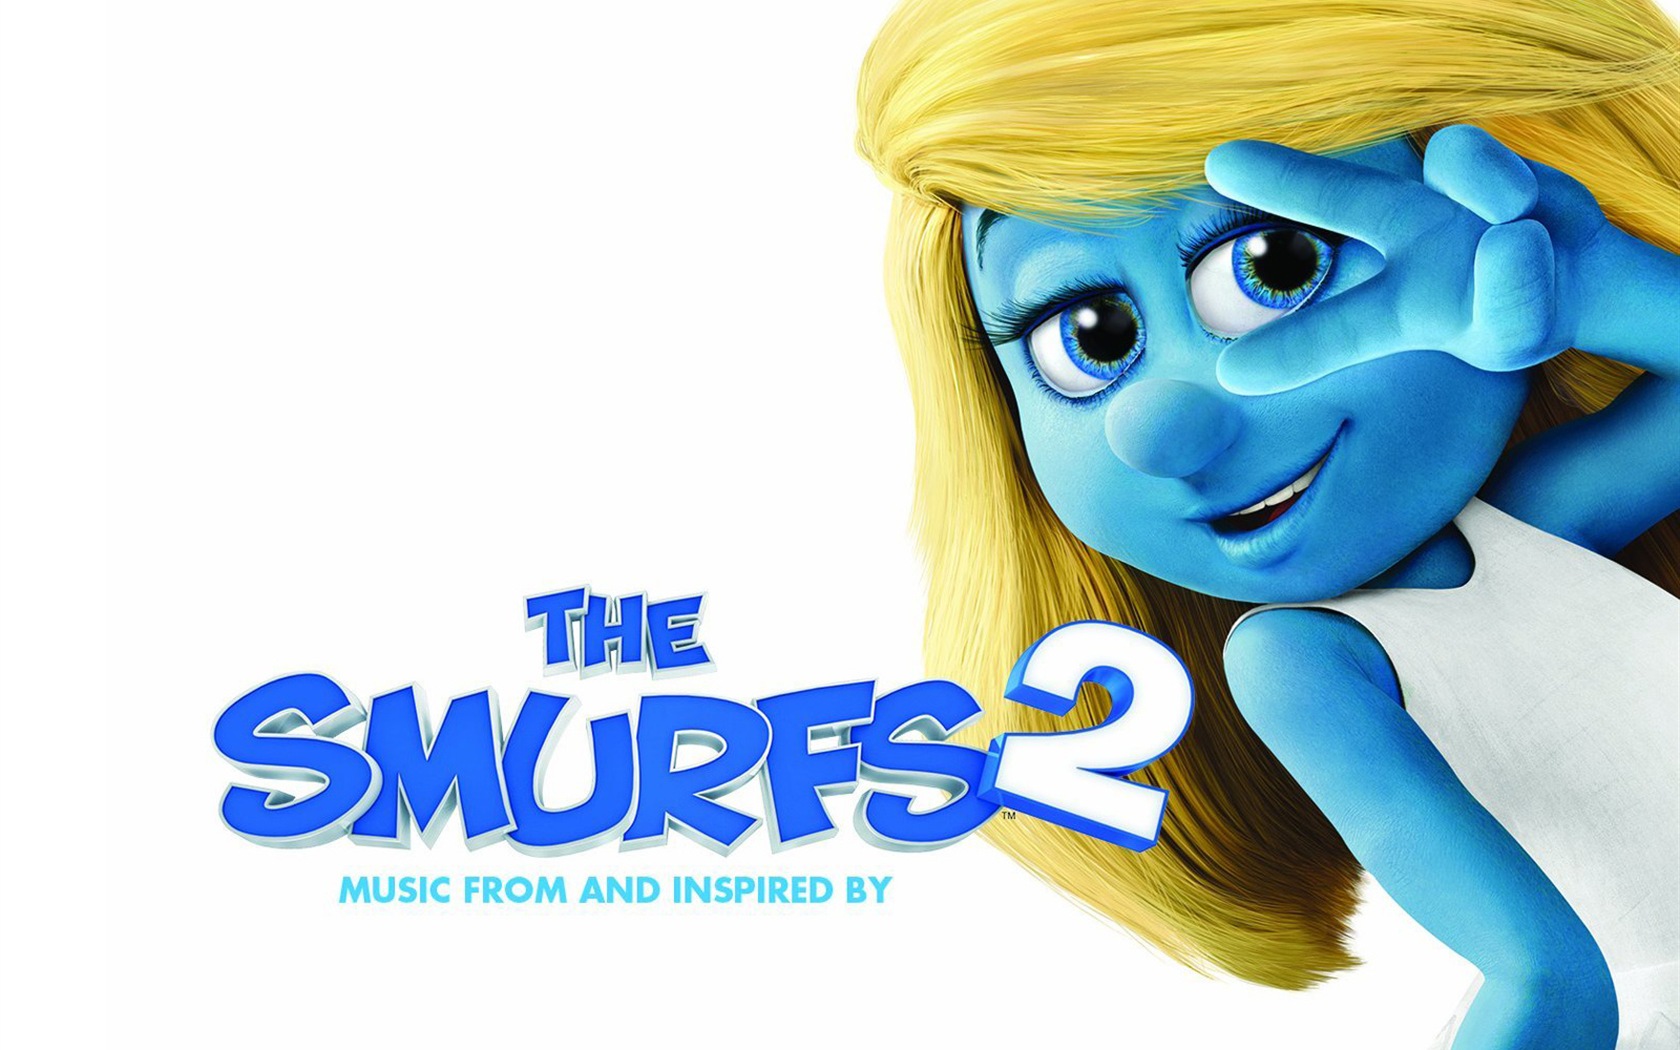 The Smurfs 2 HD movie wallpapers #4 - 1680x1050